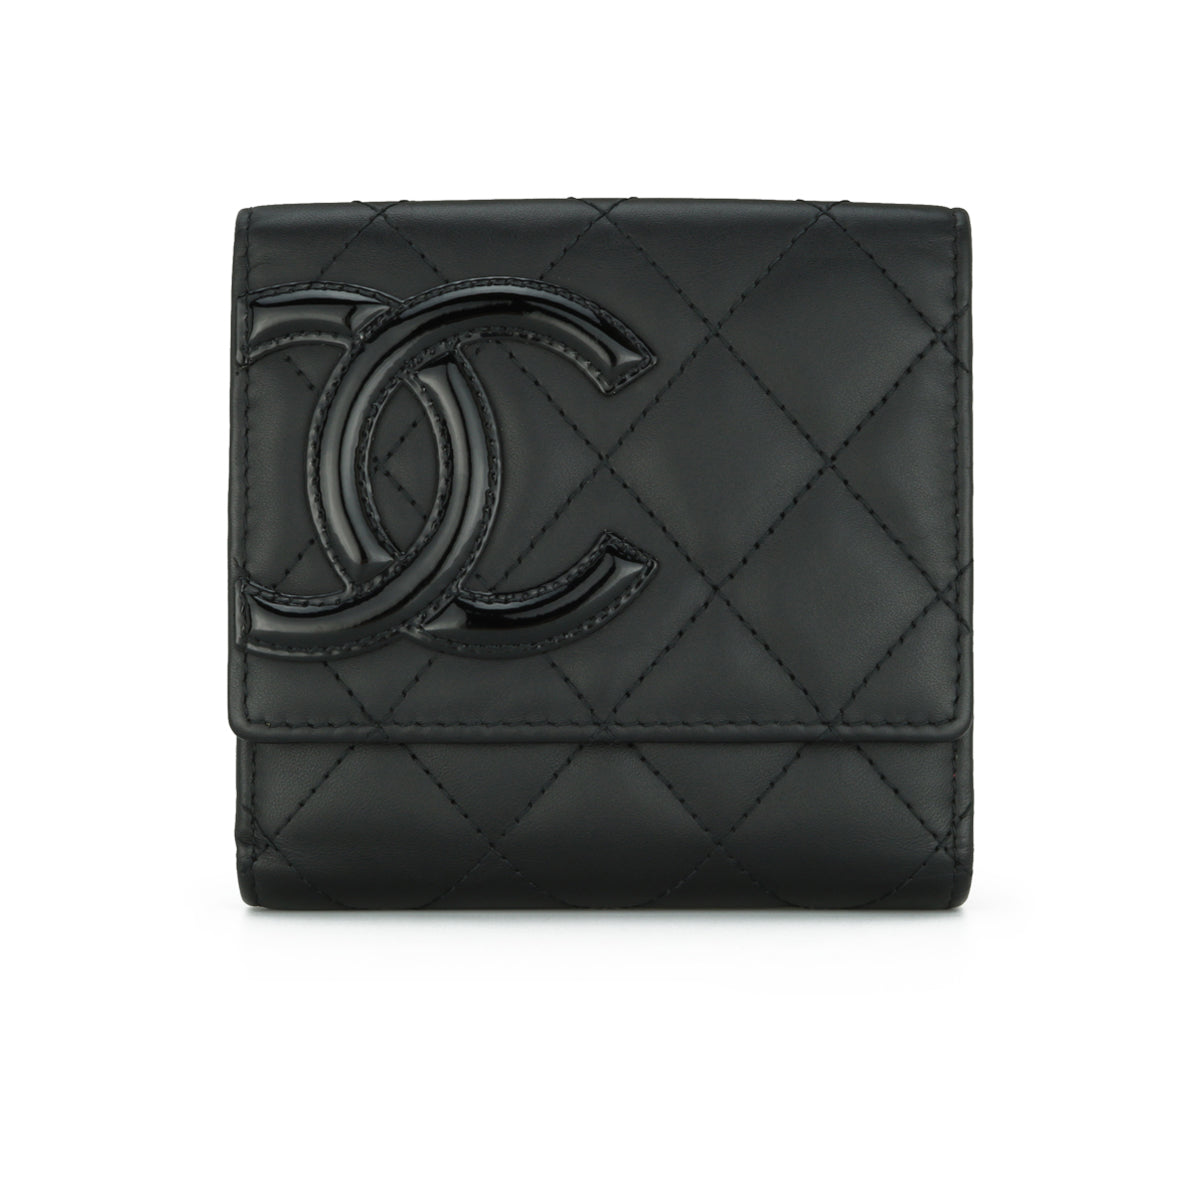 CHANEL Calfskin Quilted Cambon Tri-Fold Wallet Black 342214